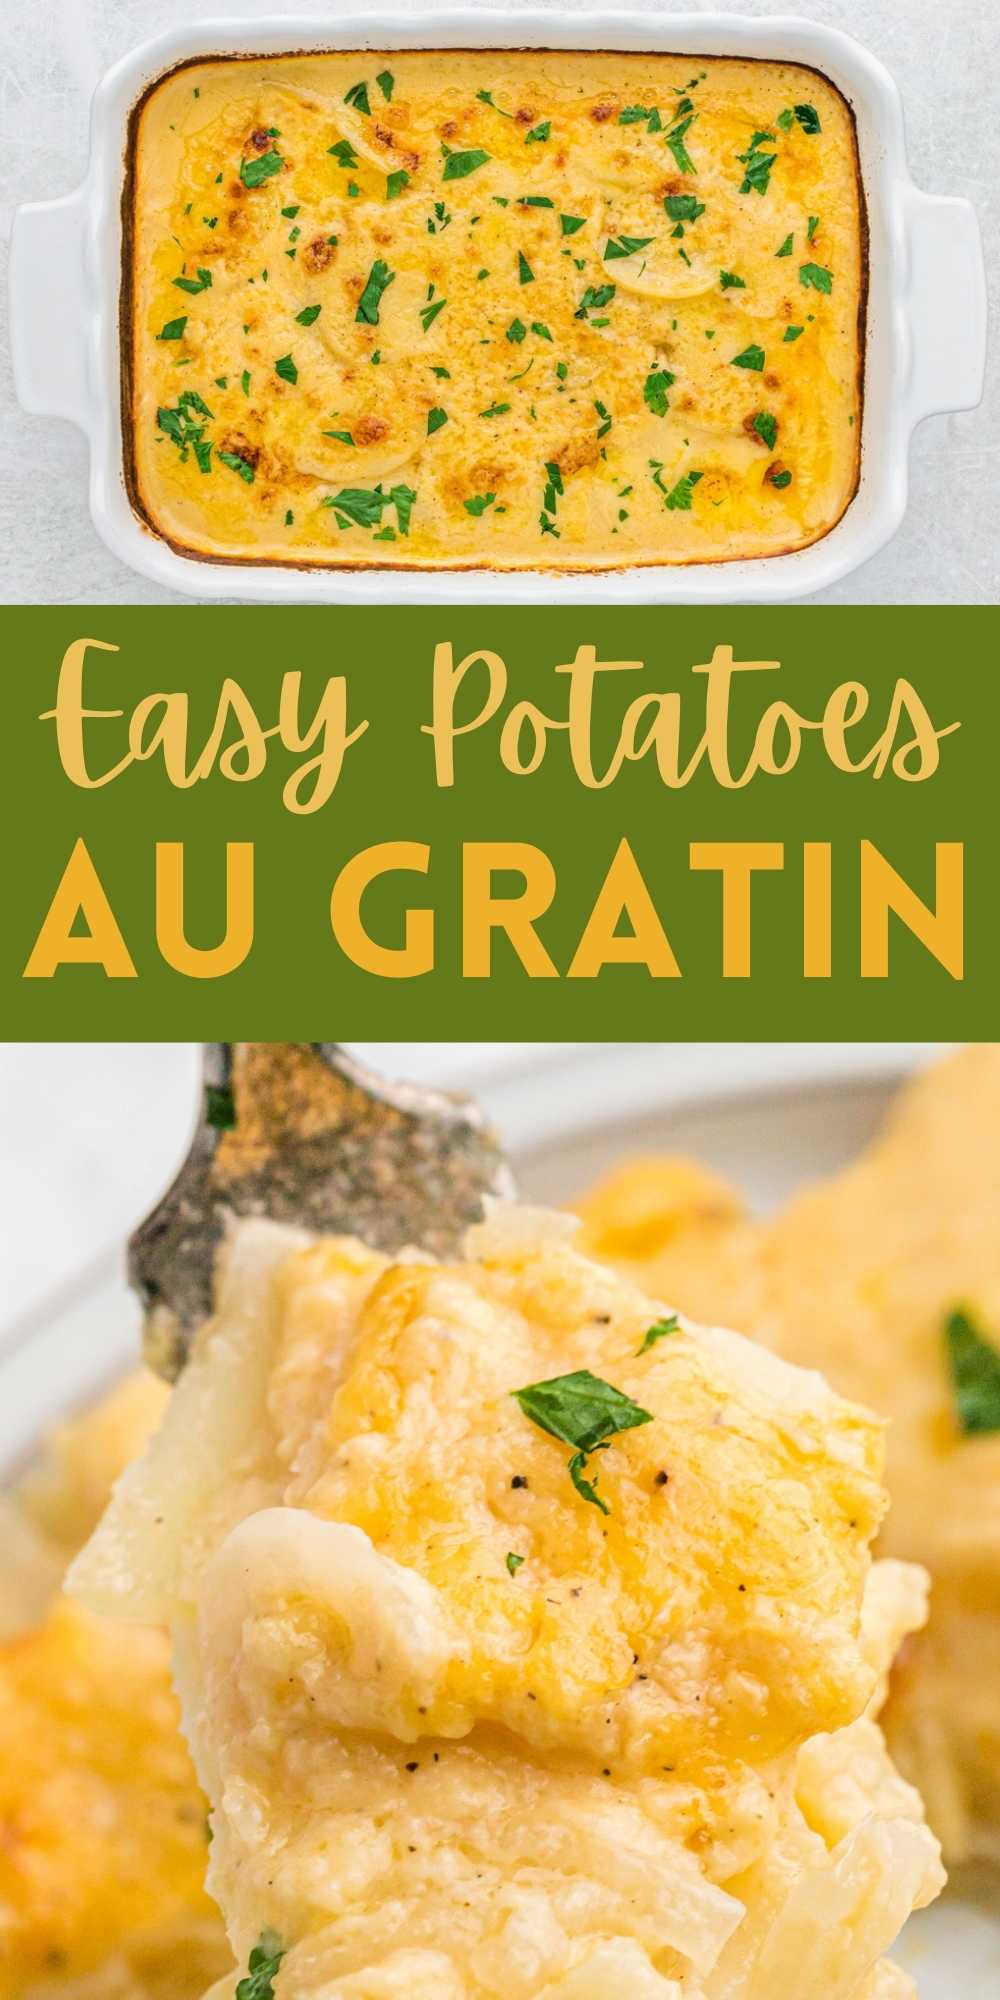 You are going to love this cheesy Potatoes Au Gratin side dish. Thinly slice potatoes are mixed in a creamy sauce and topped with cheese. This recipe is easy to make with simple ingredients. #eatingonadime #potatoesaugratin #holidaysidedish